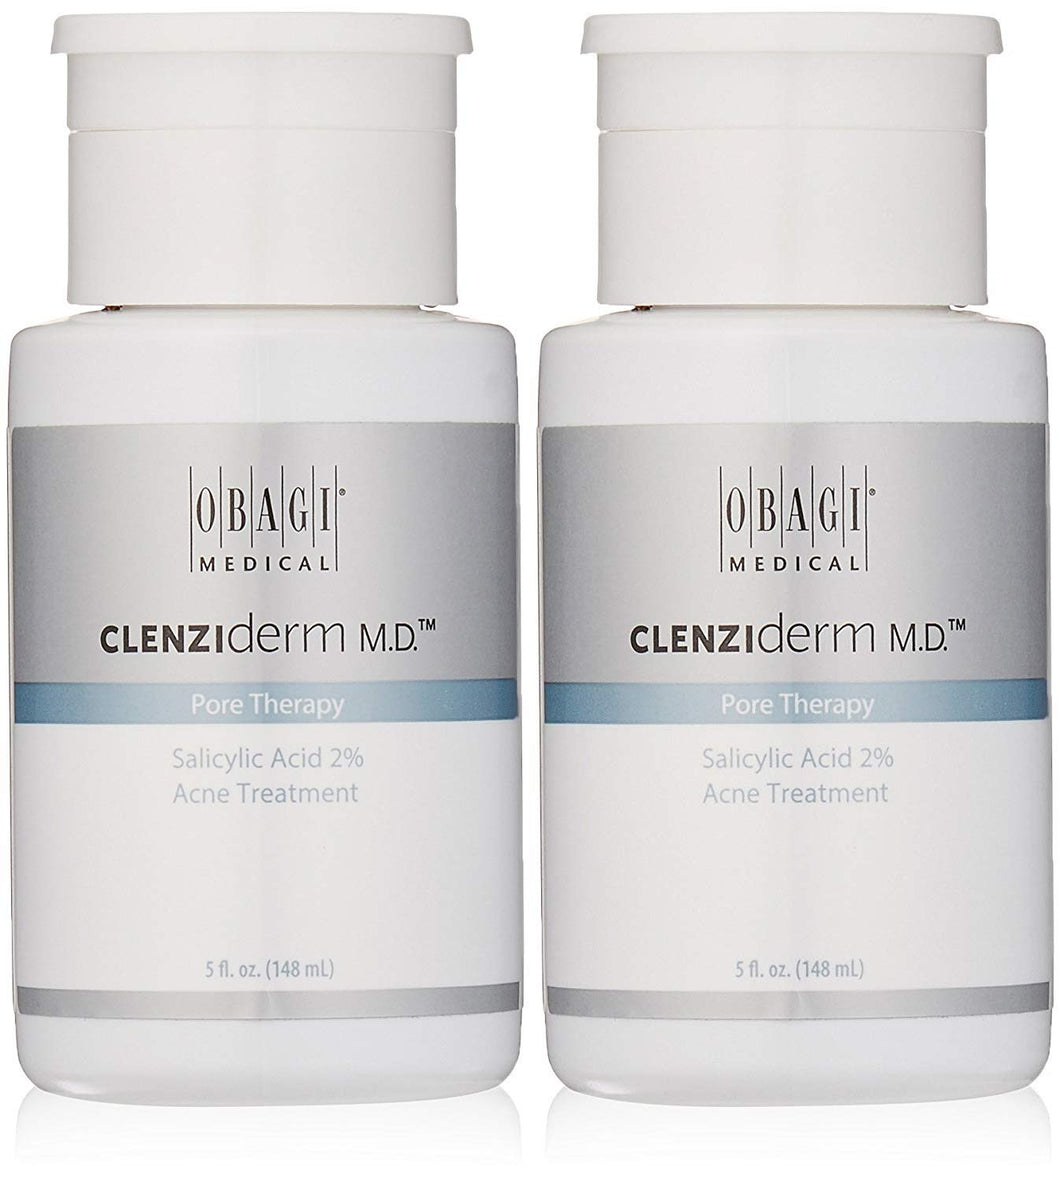 Obagi Medical CLENZIderm M.D. Pore Therapy Salicylic Acid 2% Acne Treatment, 5 Fl Oz Pack of 2